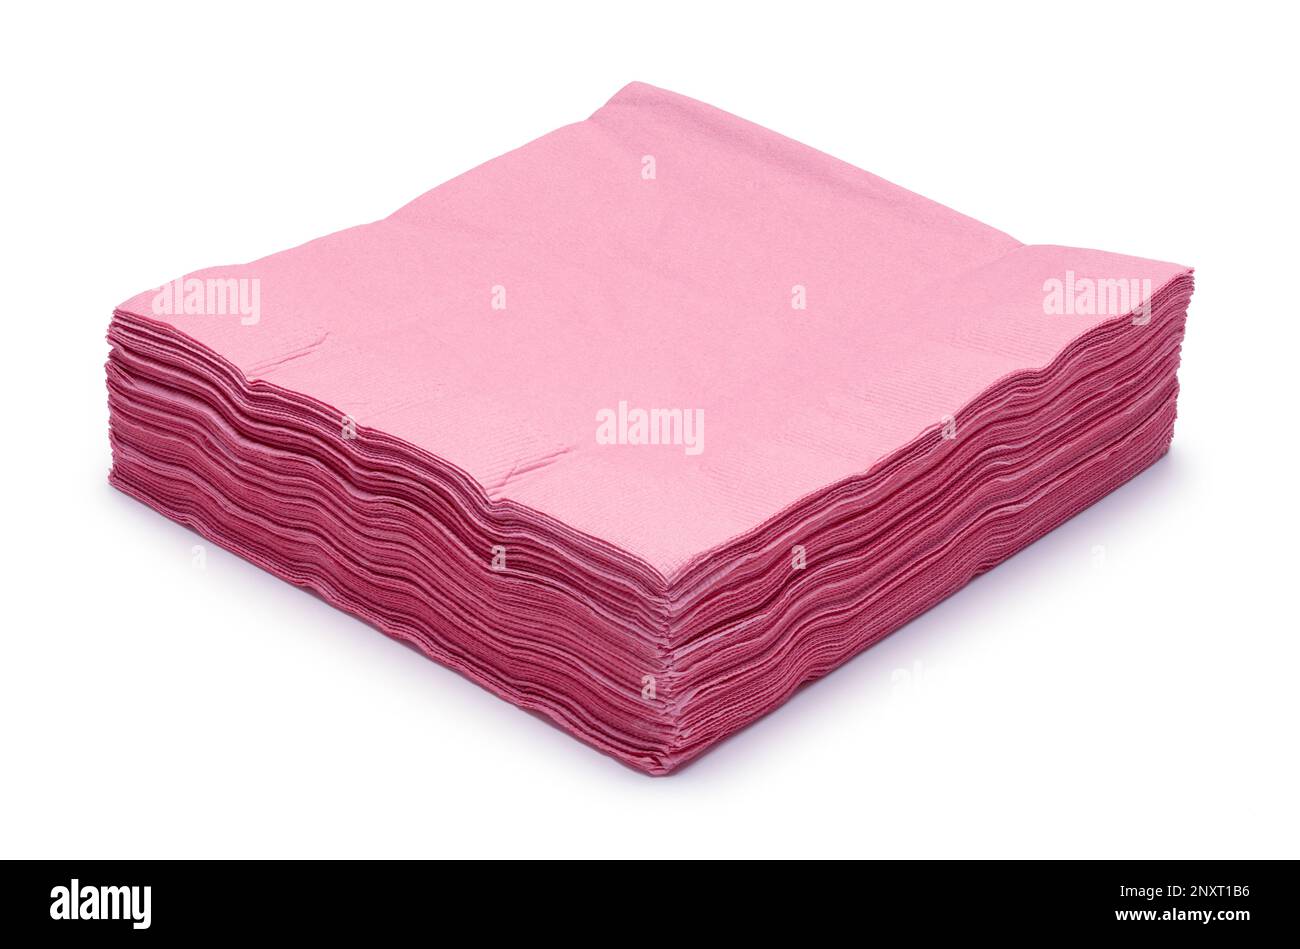 Pile of Pink Napkins Cut Out on White. Stock Photo